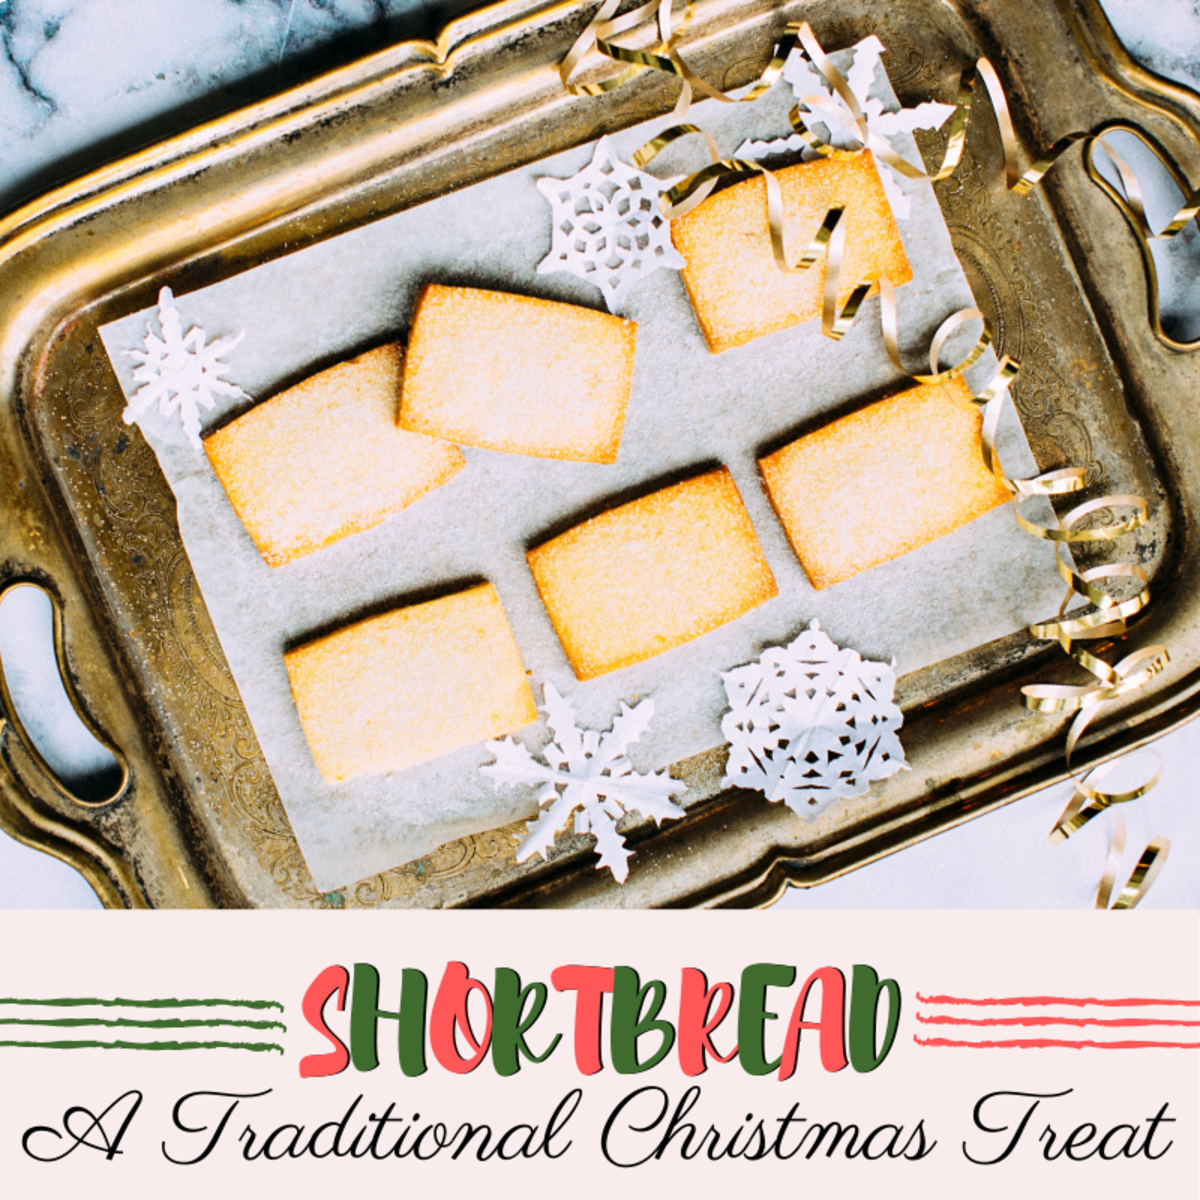 Shortbread is a simple but well-loved treat that has long been associated with Christmastime. 